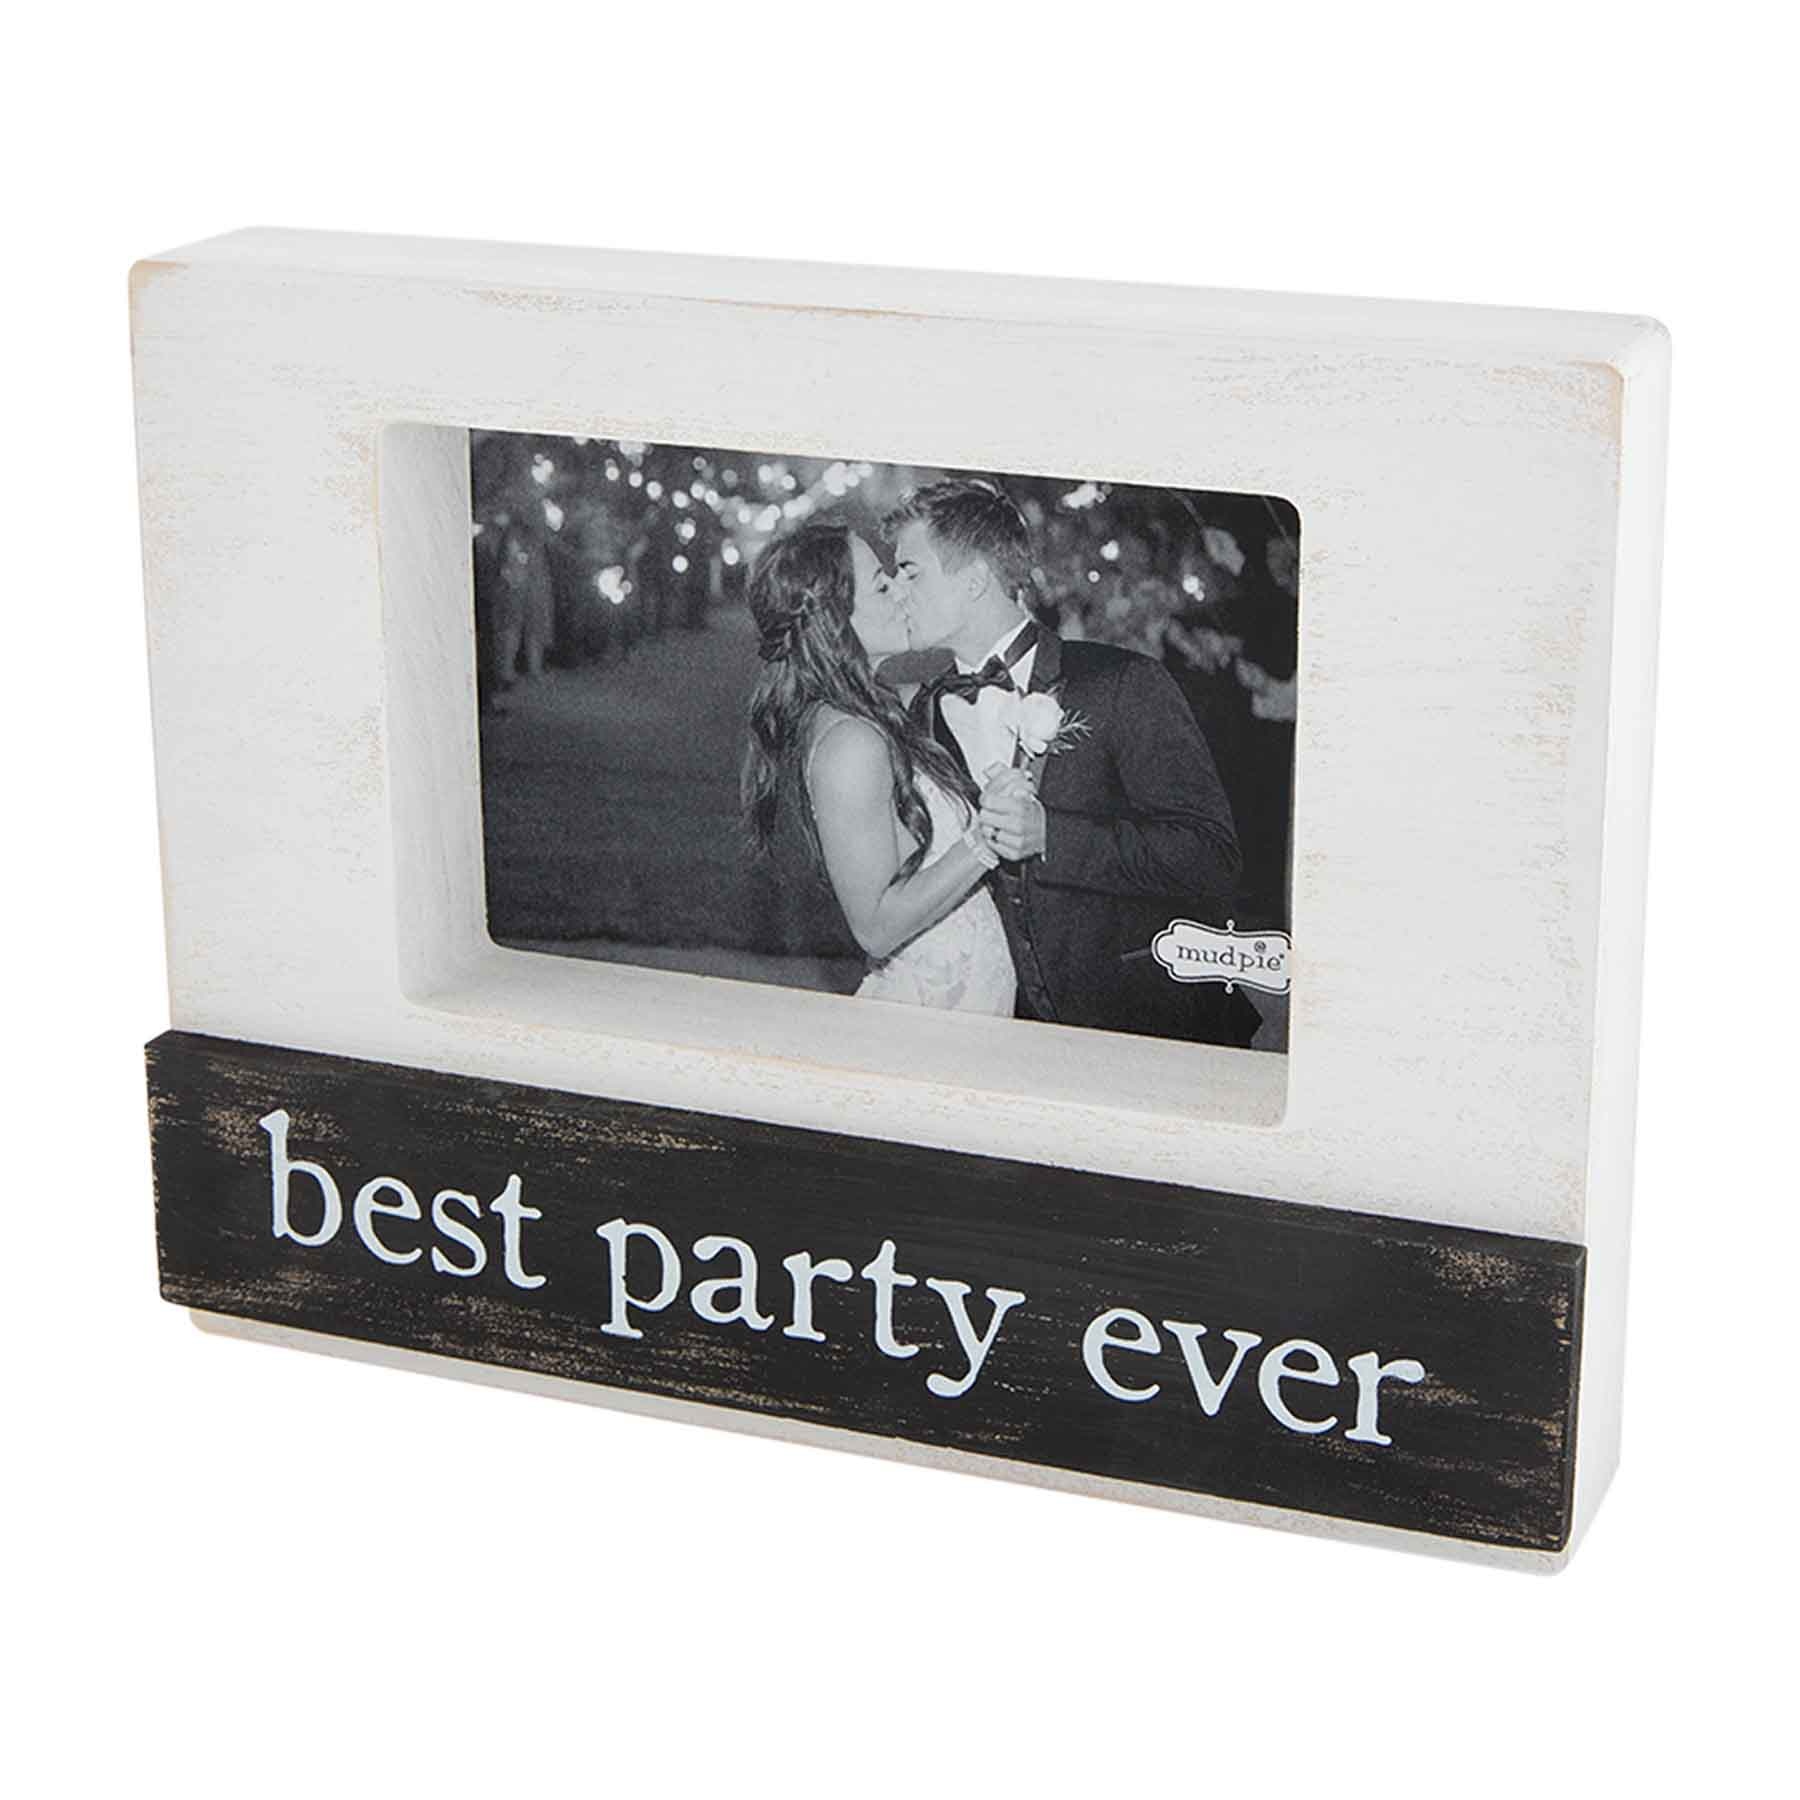 Mudpie Best Party Ever Frame